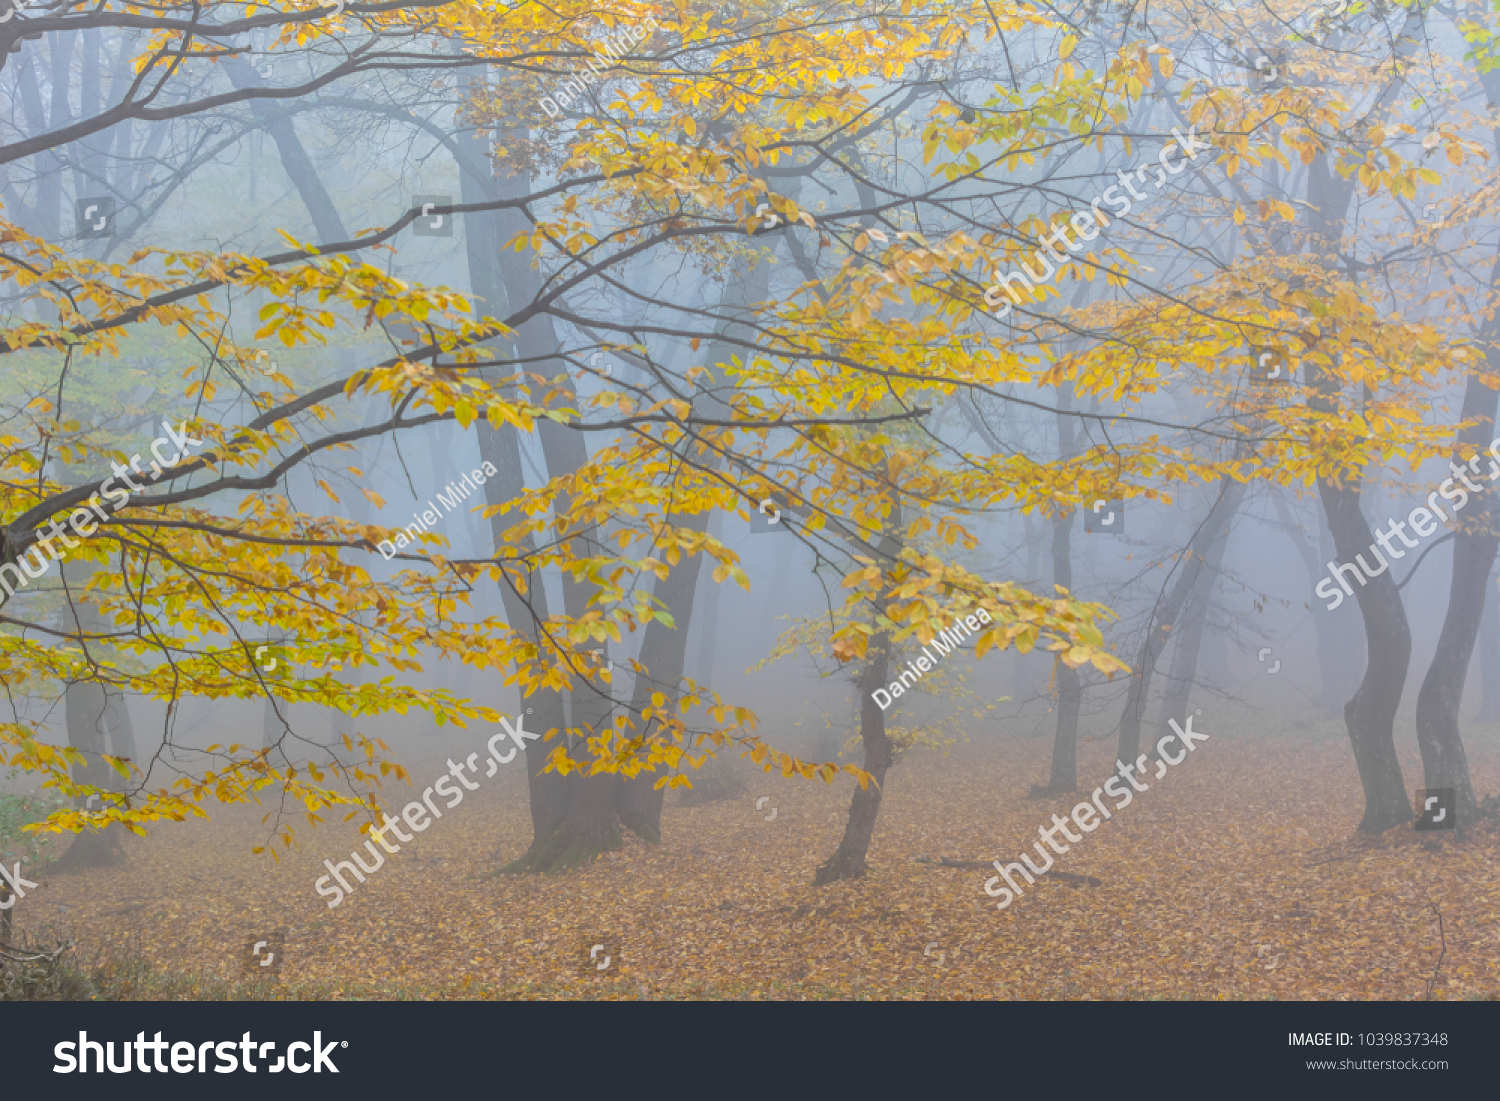 Amazing atmosphere in The Hoia Baciu forest, one of the most haunted forest in the world. It's very knowed for the unexplained phenomena.It was a beautiful foggy and colorful morning. #1039837348